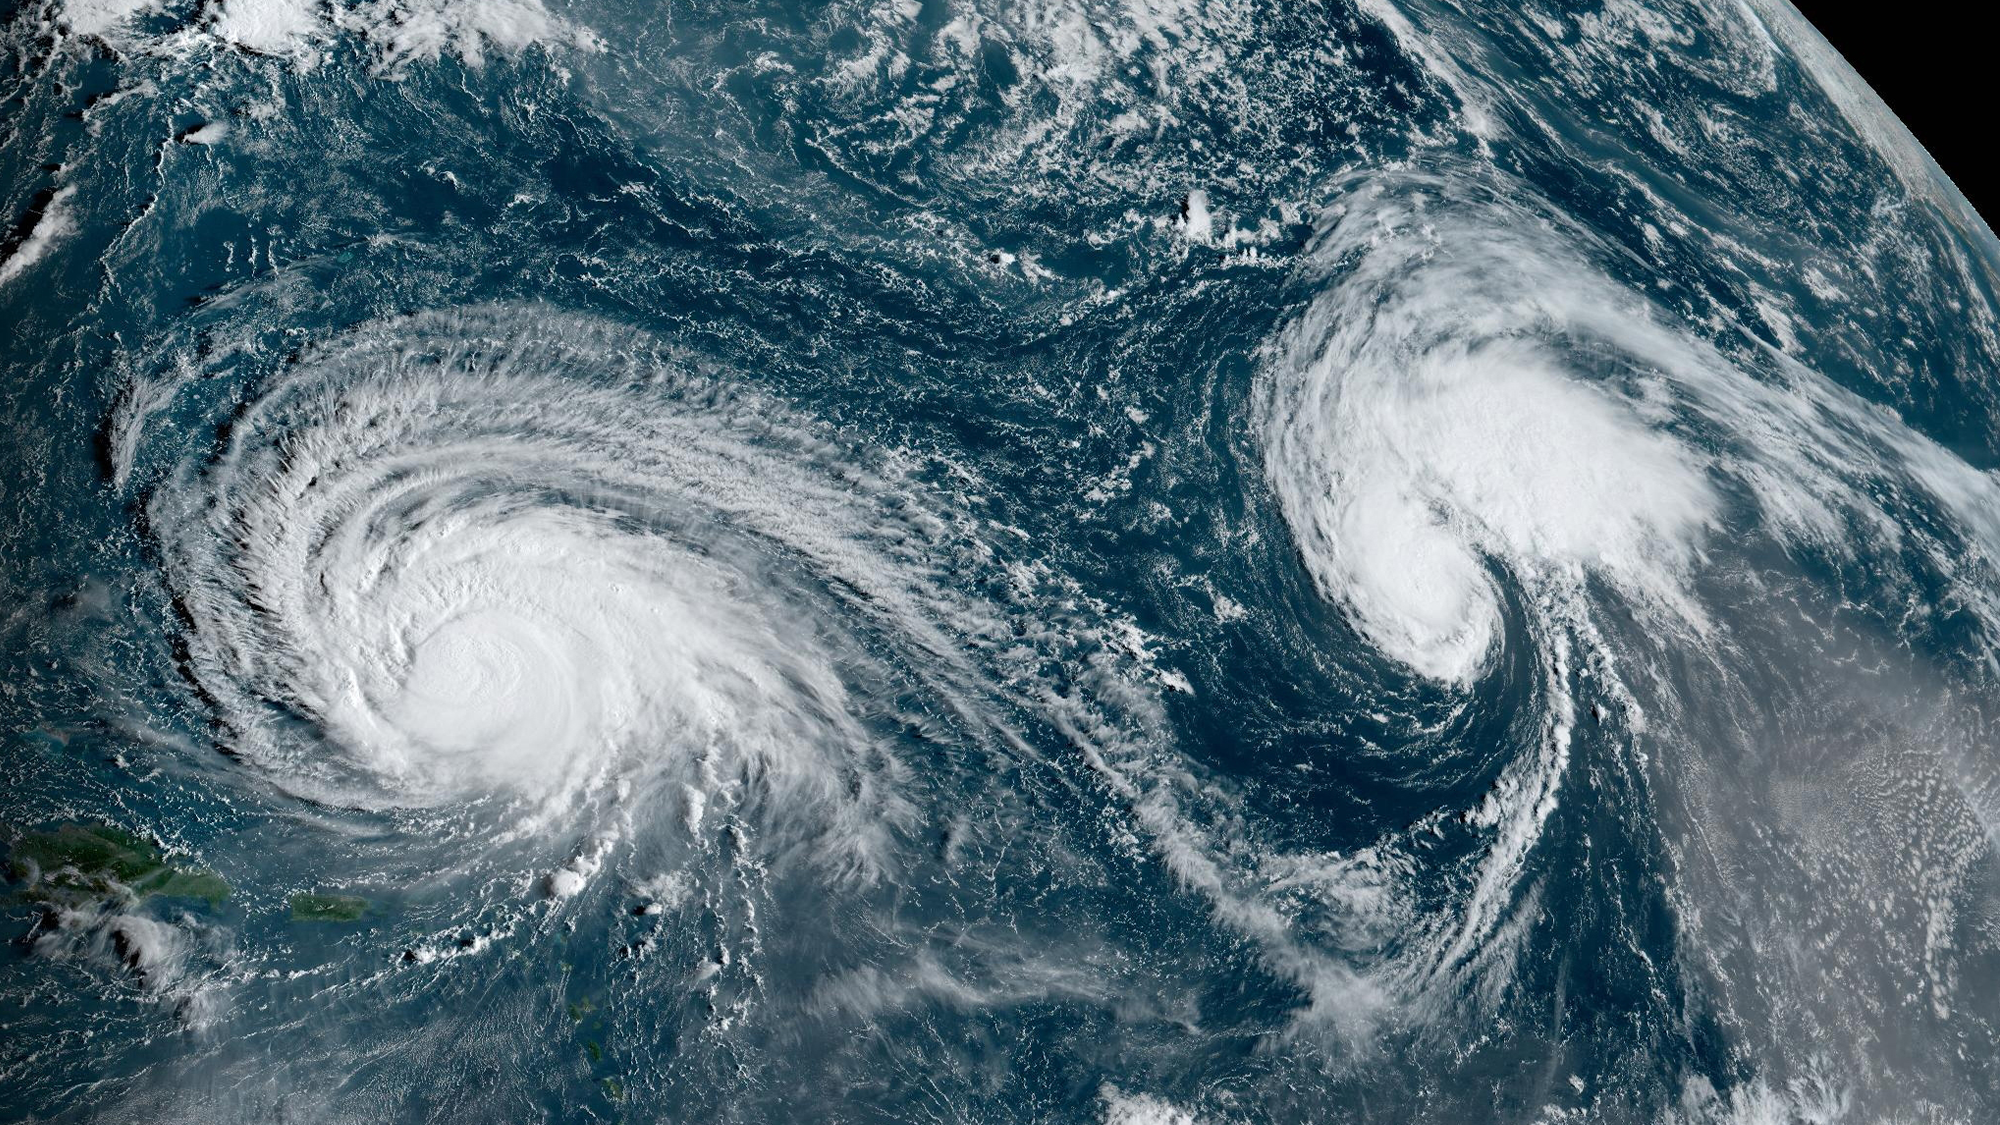 A satellite photo showing the swirling clouds of Hurricane Lee and Tropical Storm Margot in the Atlantic Ocean.